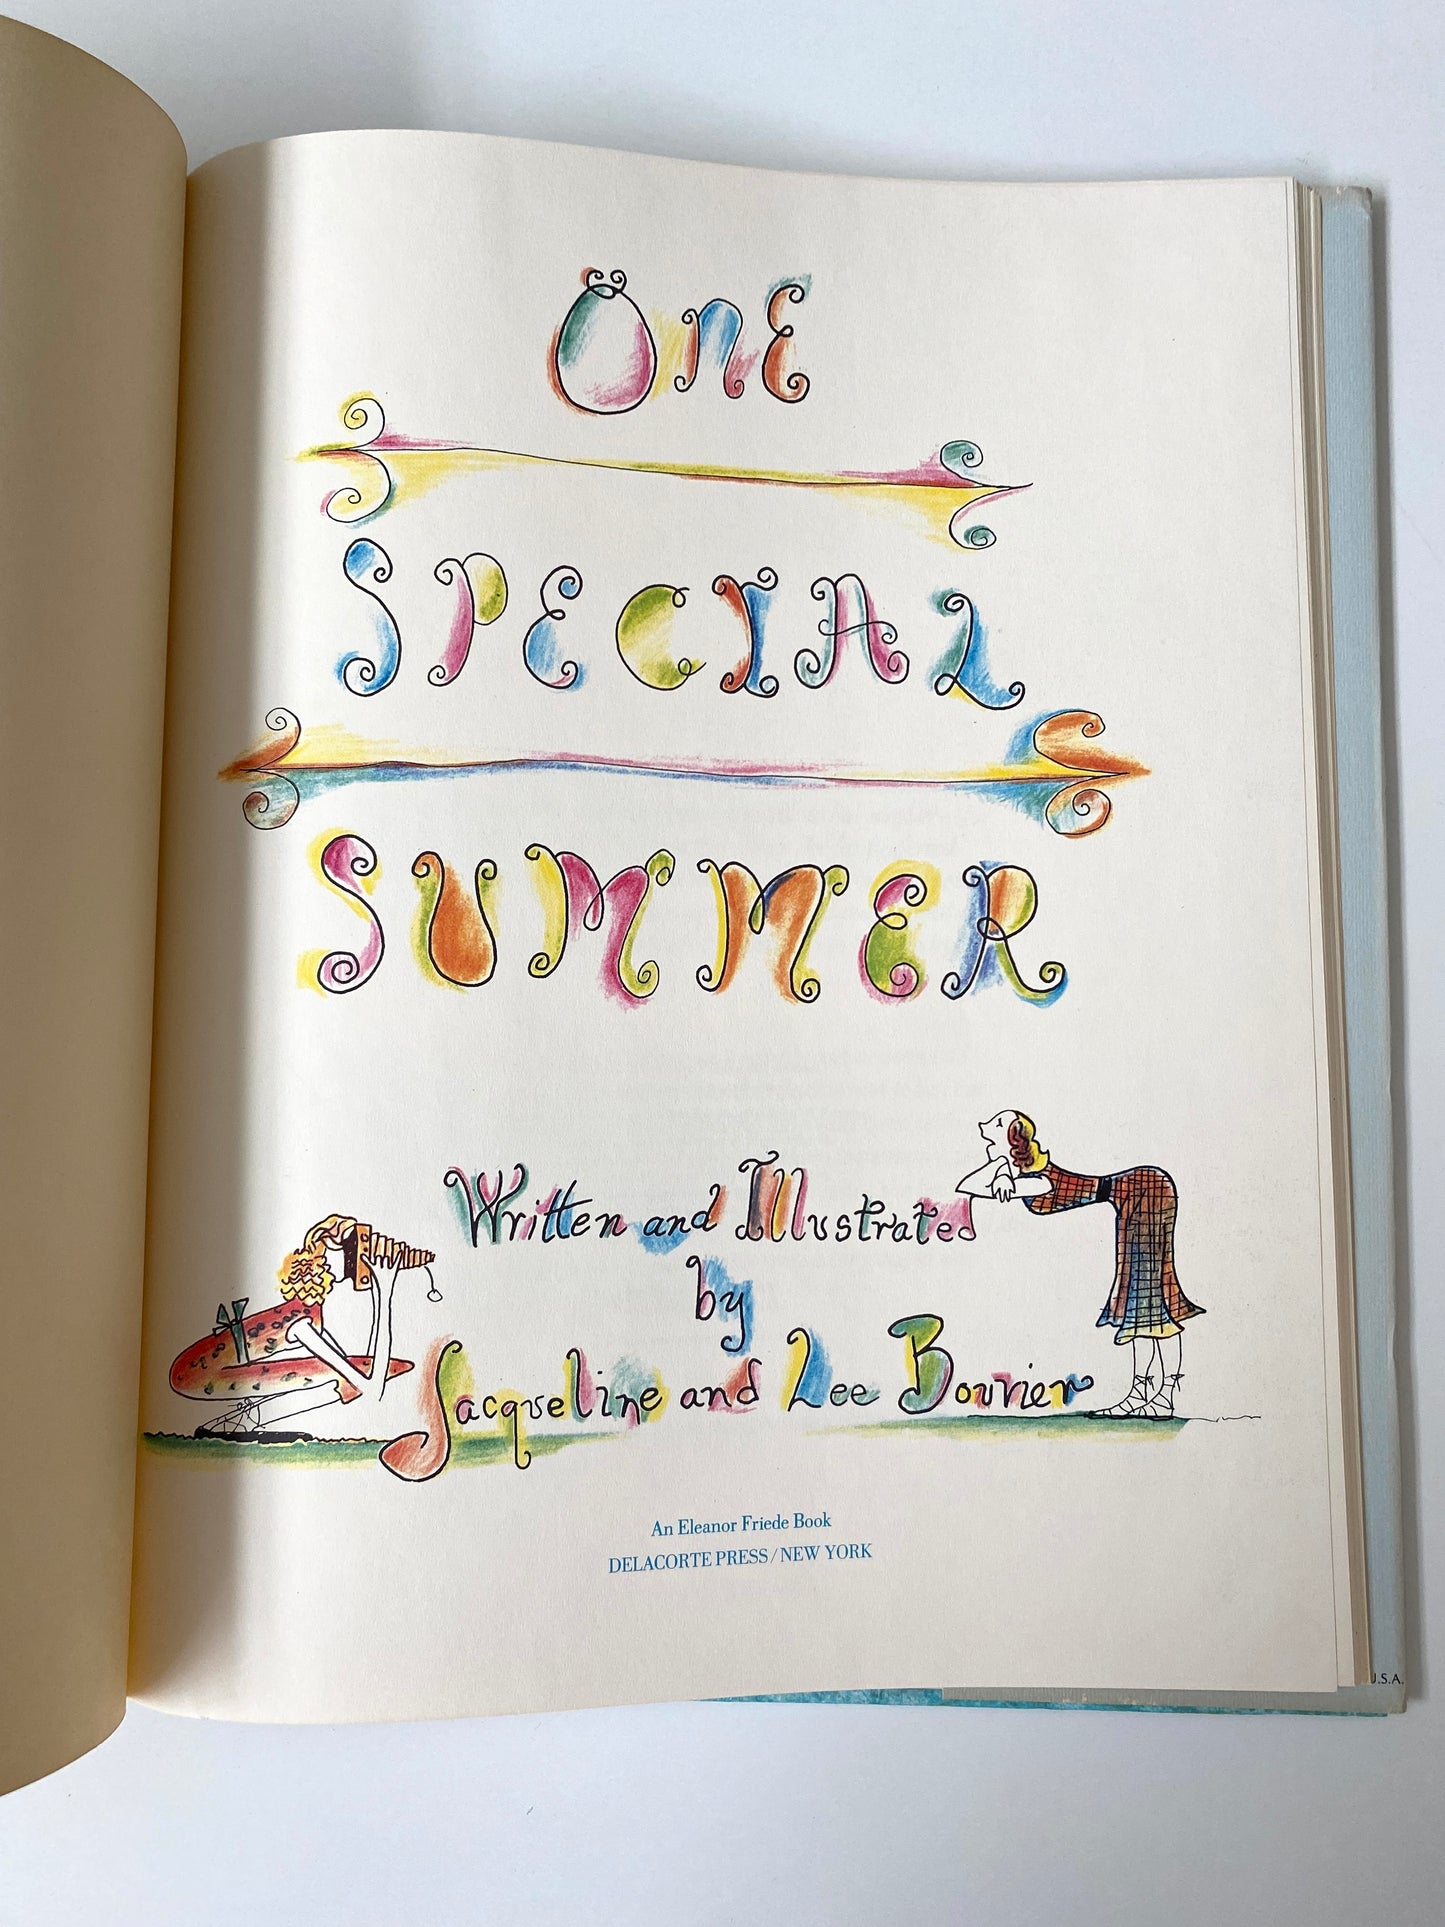 One Special Summer/ Jacqueline & Lee Bouvier/ First Edition 